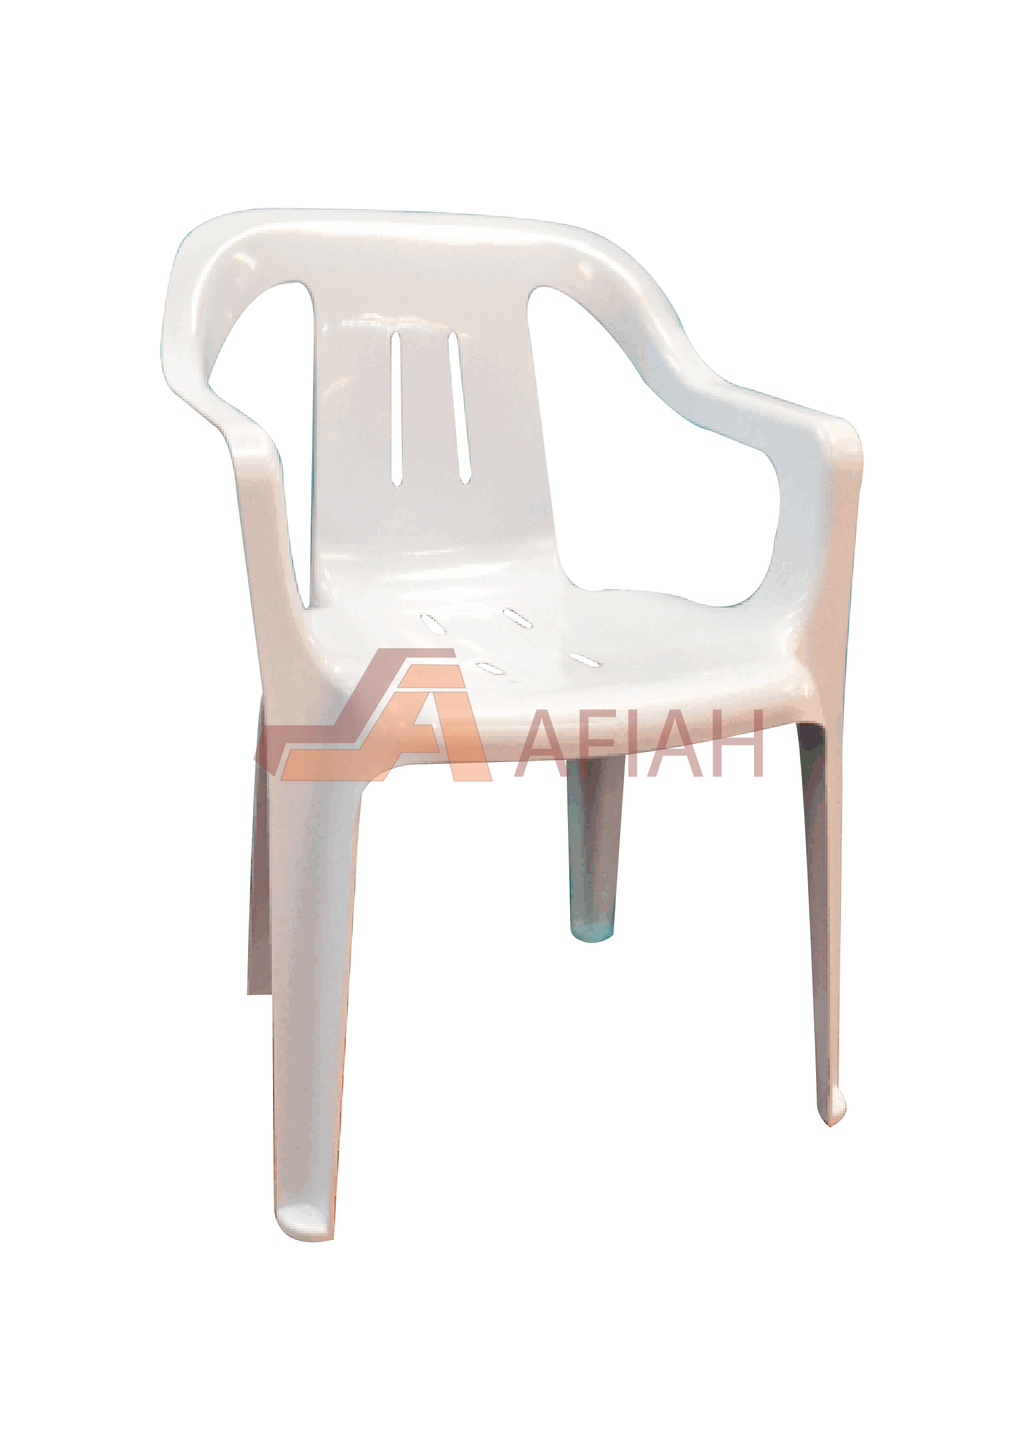 3V Plastic Chair with Arm Rest (Model P31)